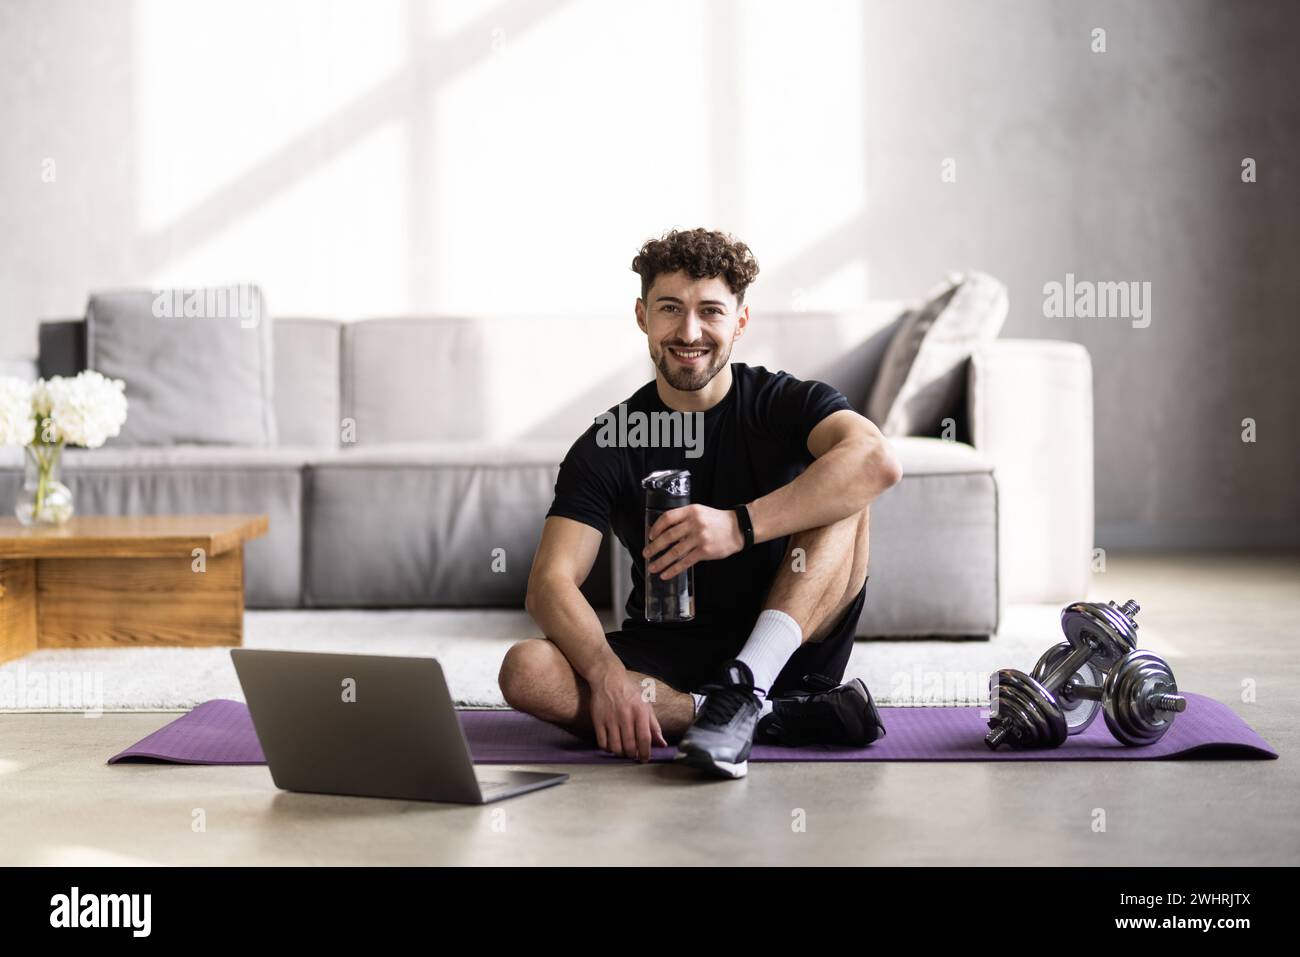 Smiling man using laptop and drinking water while having break during workout at home Stock Photo